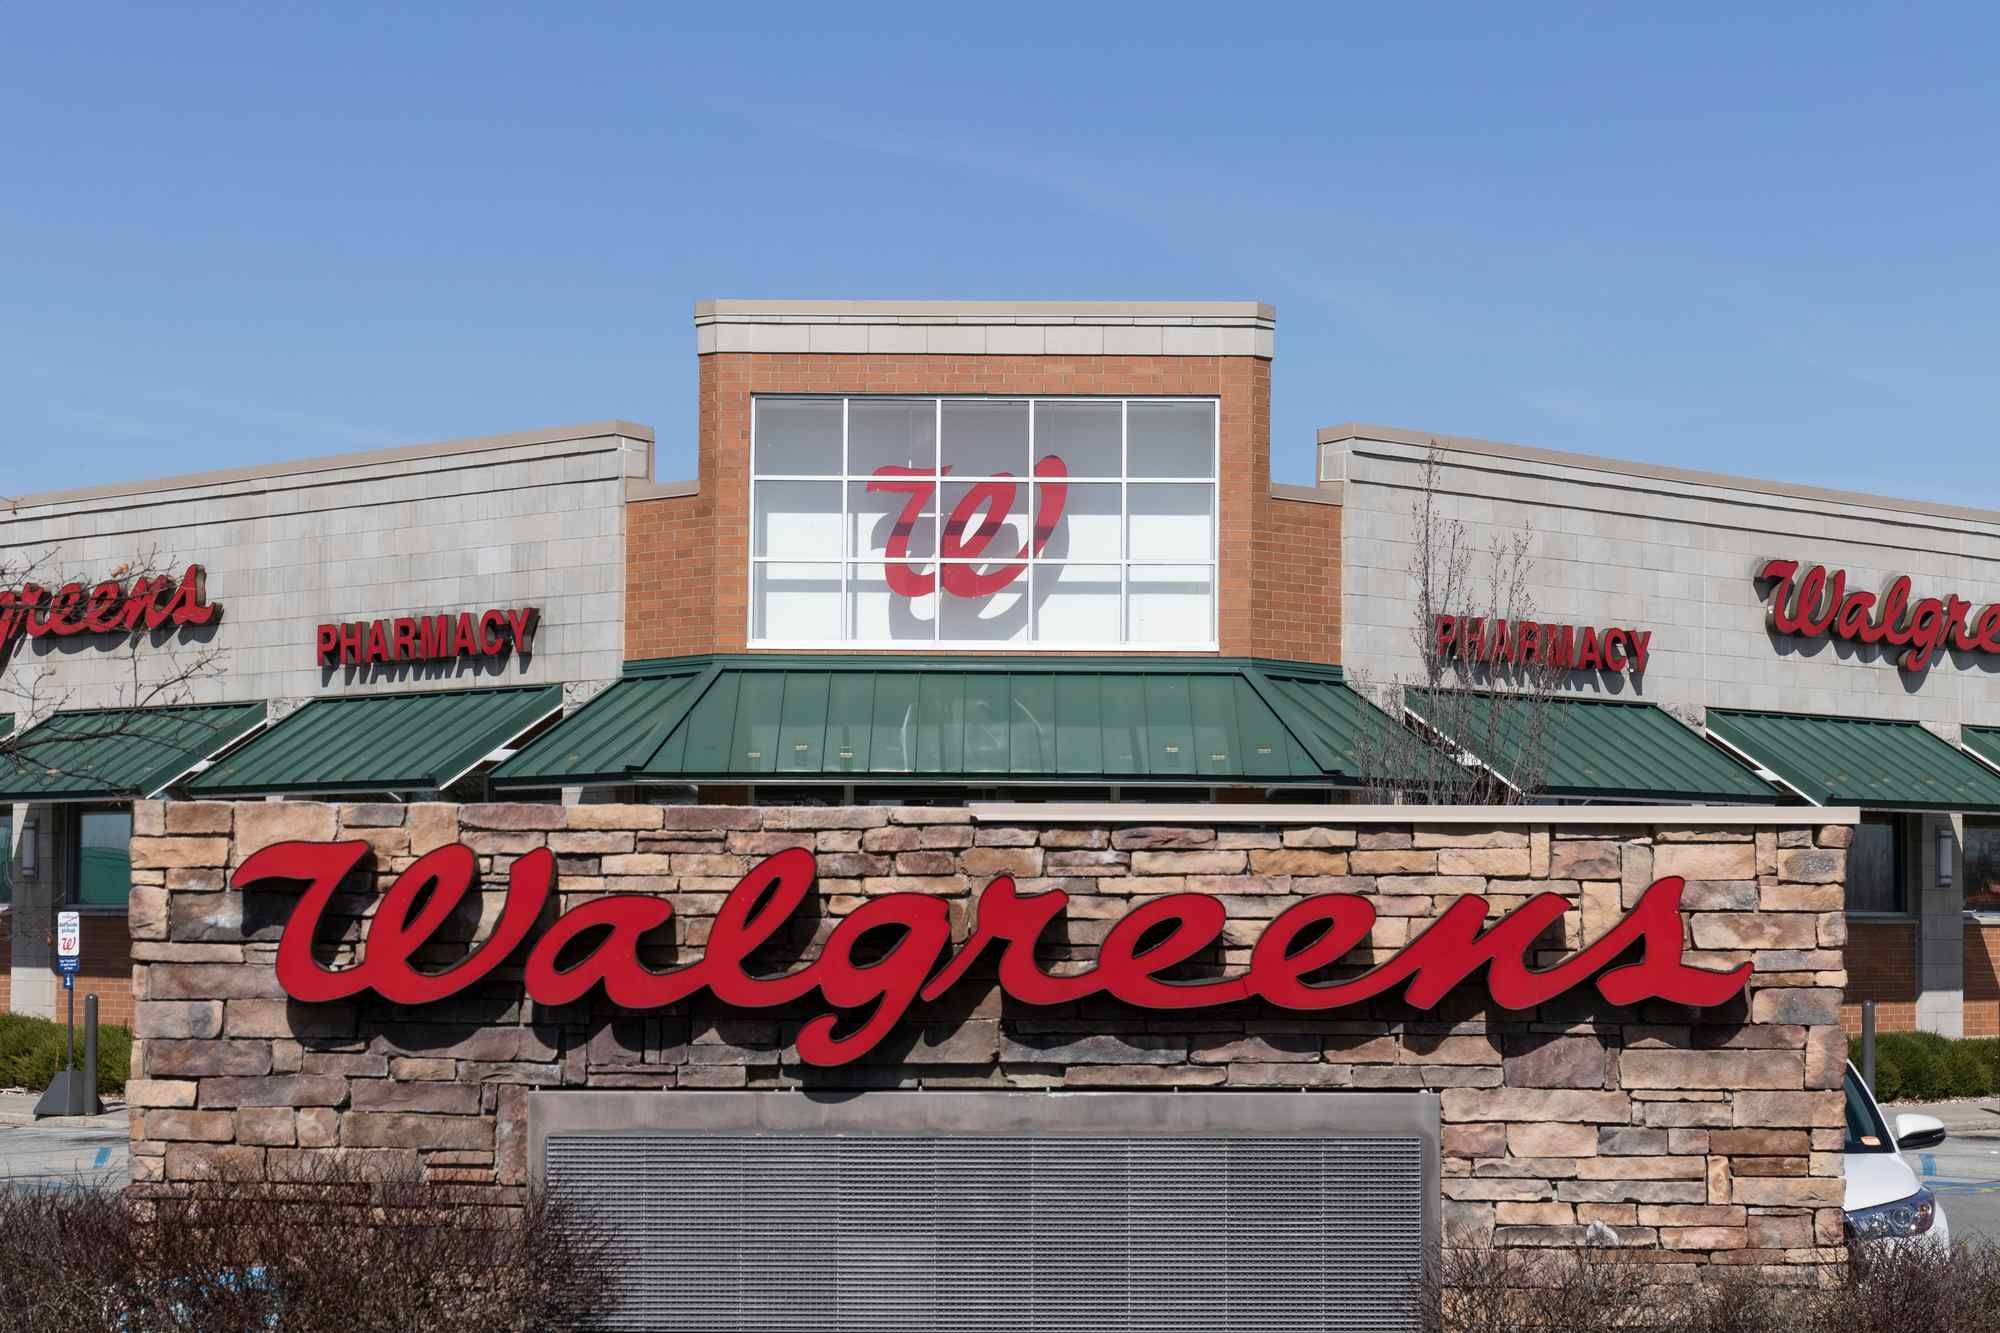 Walgreens is facing a class action lawsuit over a lack of disability access.